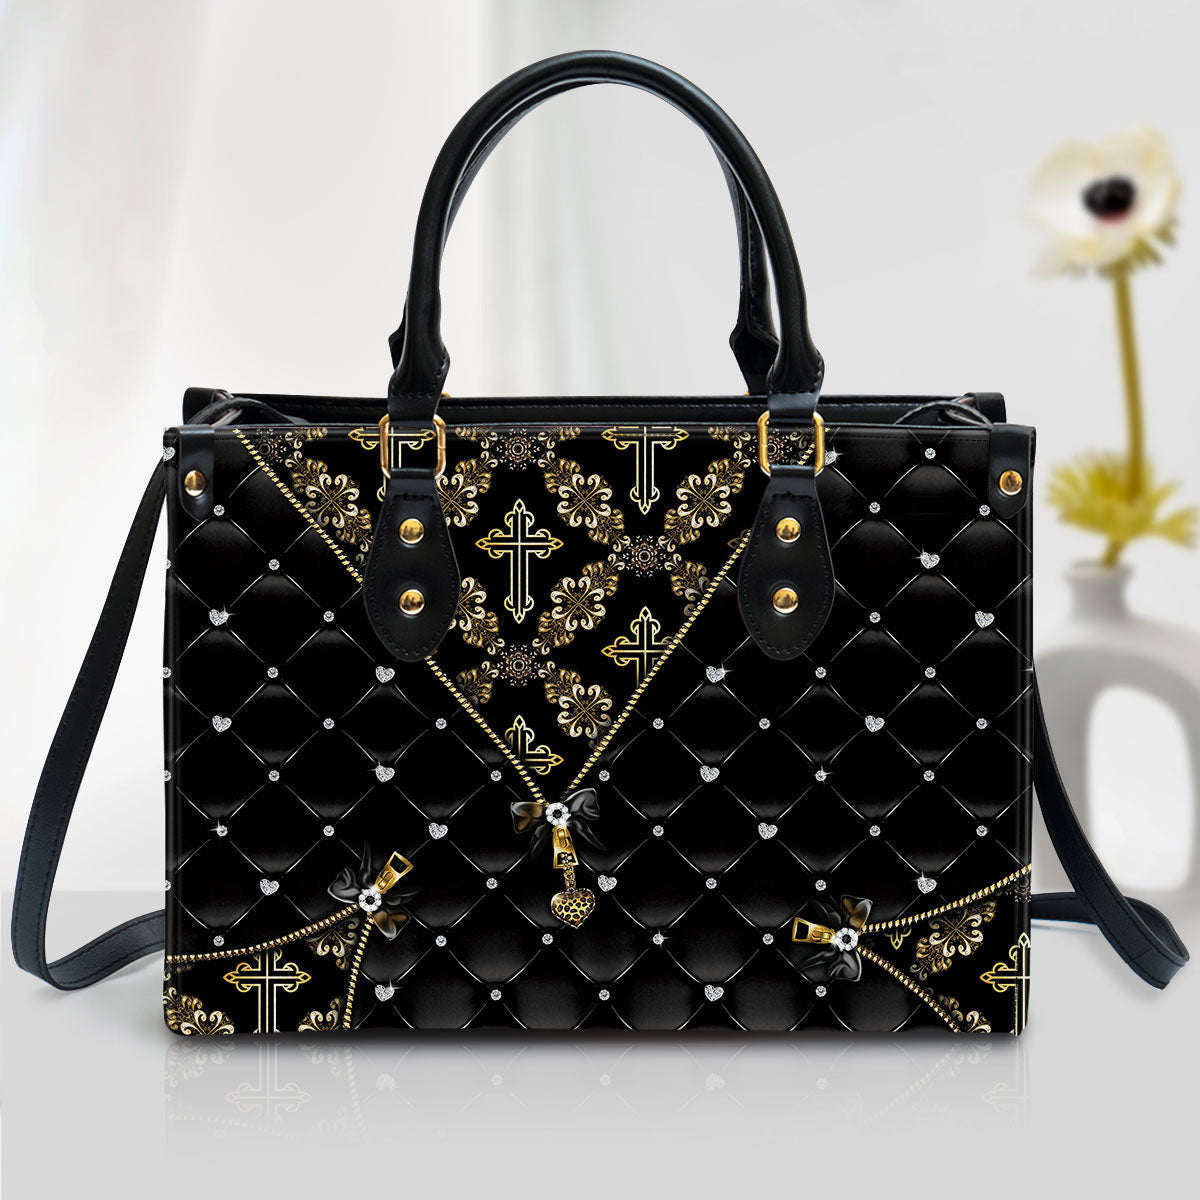 Unique Cross Leather Handbag - Religious Gifts For Women - Women Pu Leather Bag